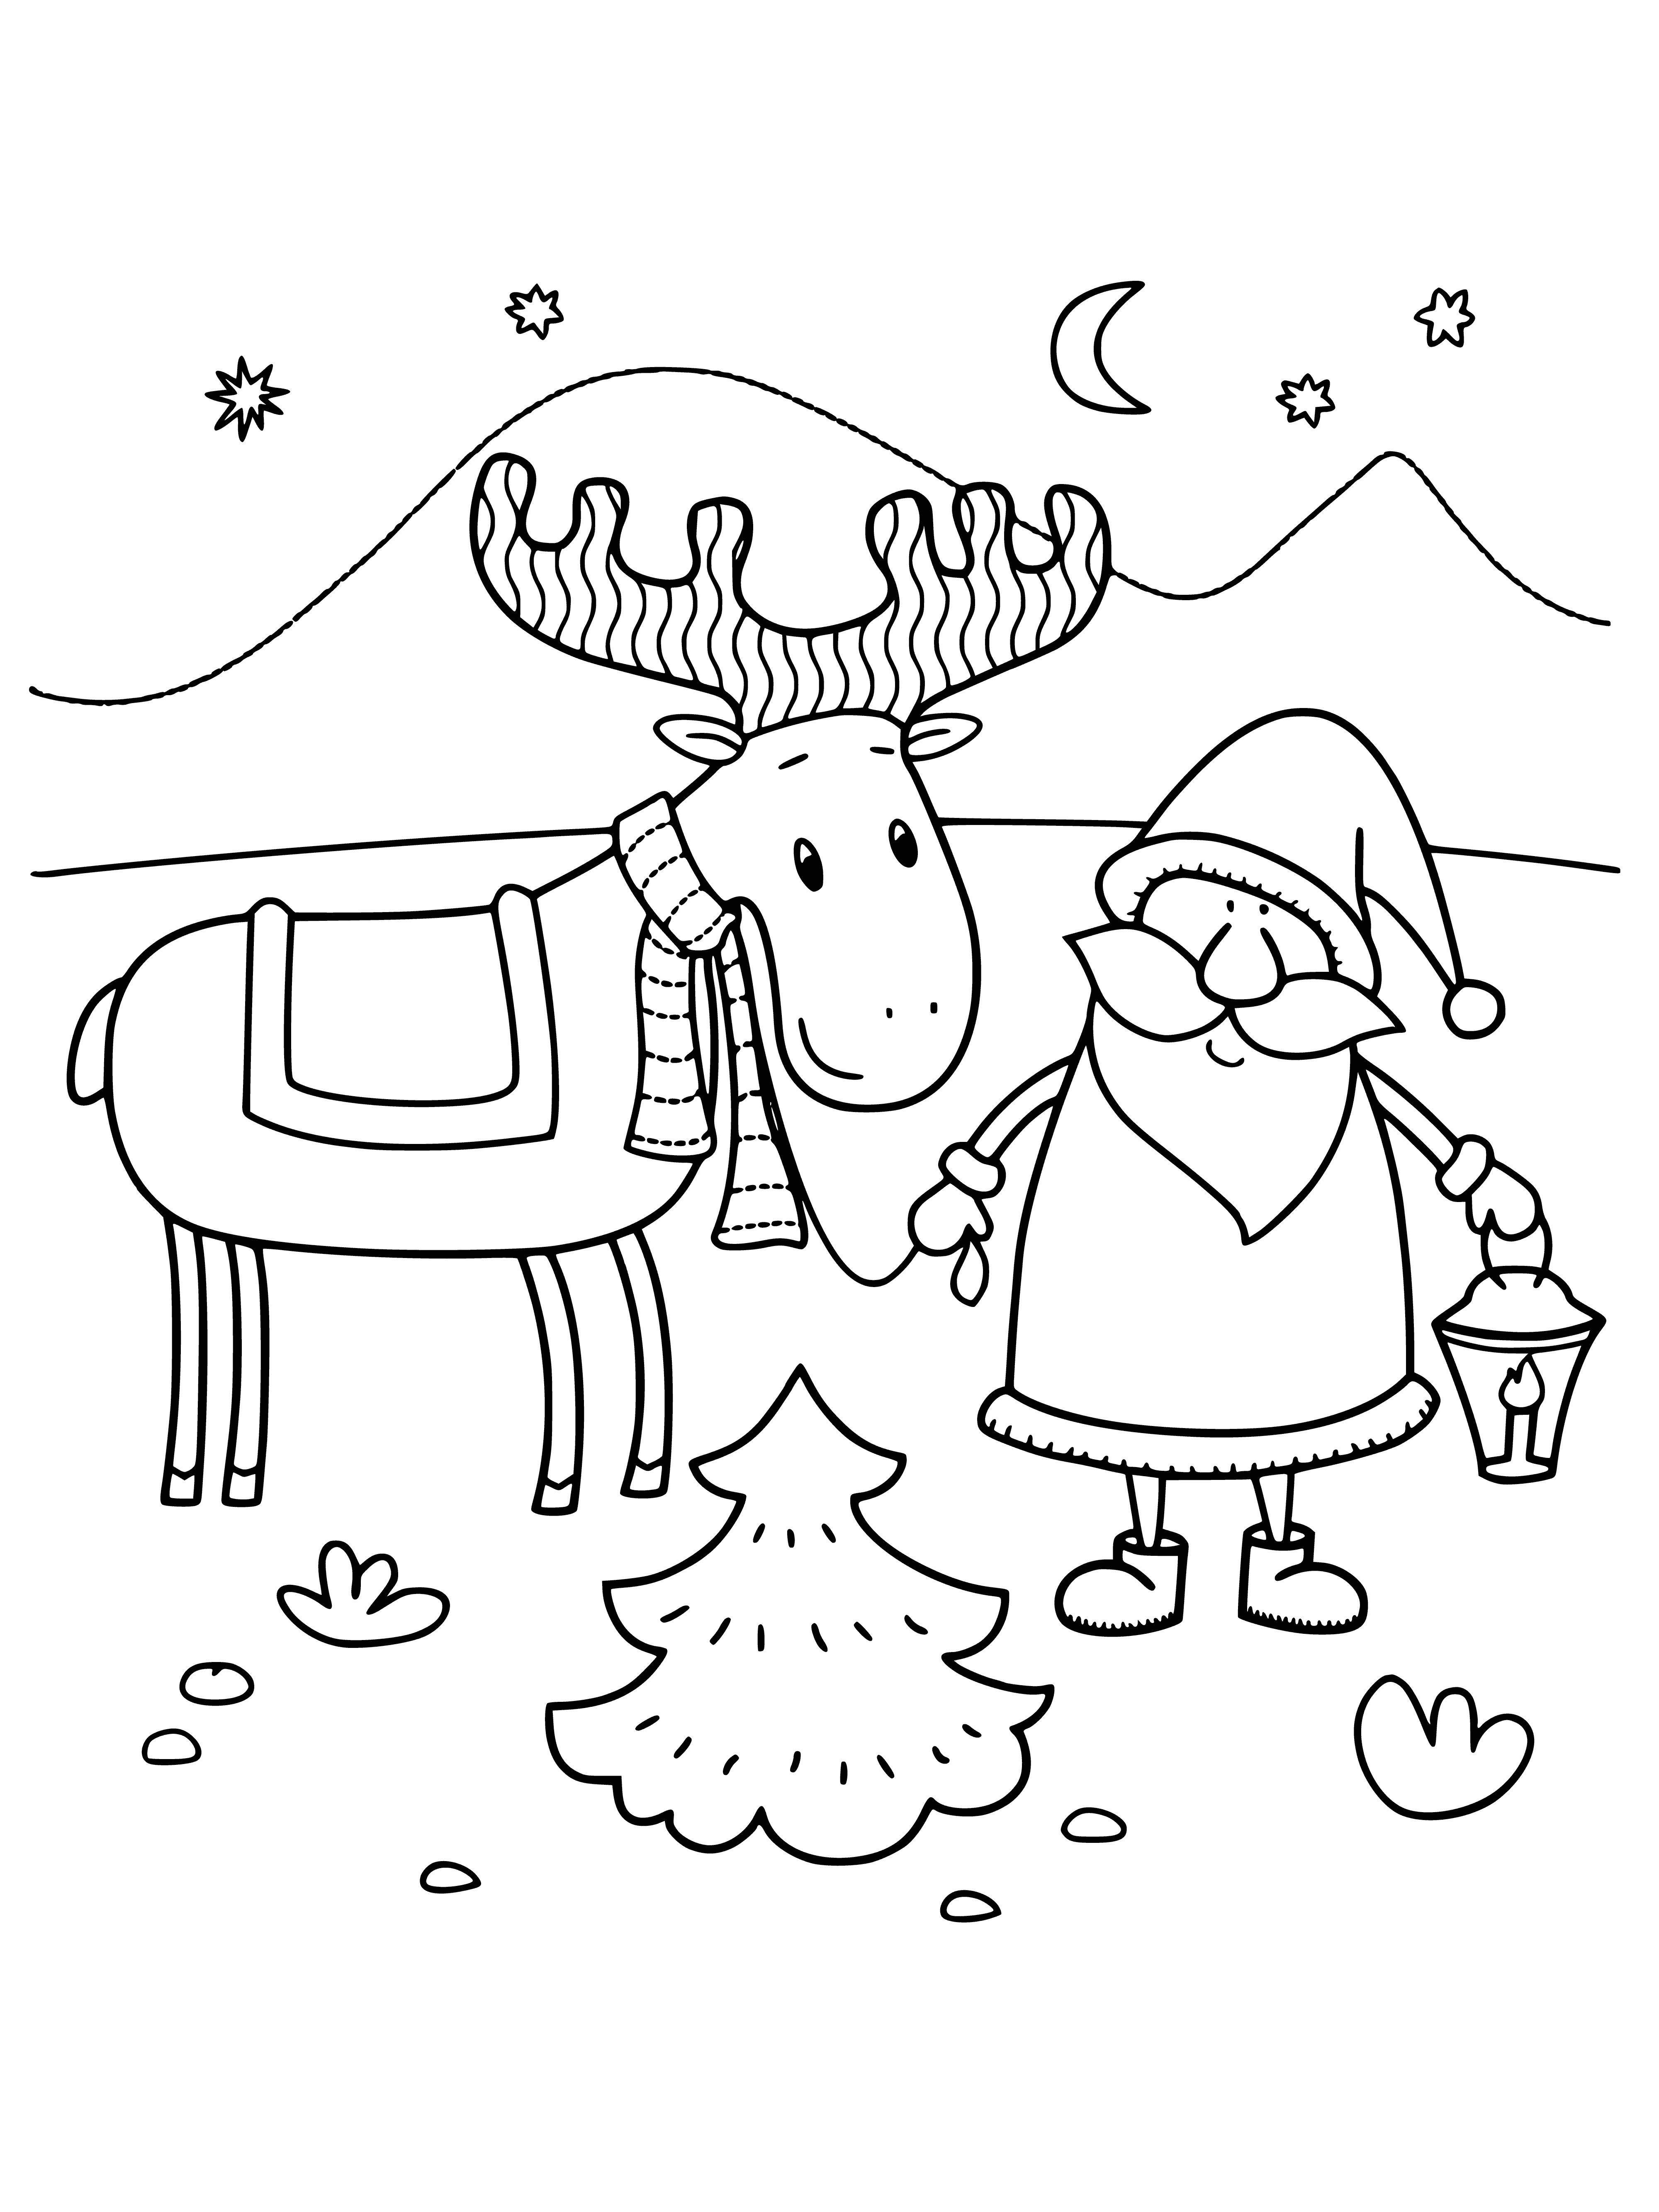 coloring page: Santa Claus with deer in a color page - white beard, red coat, brown fur, antlers.